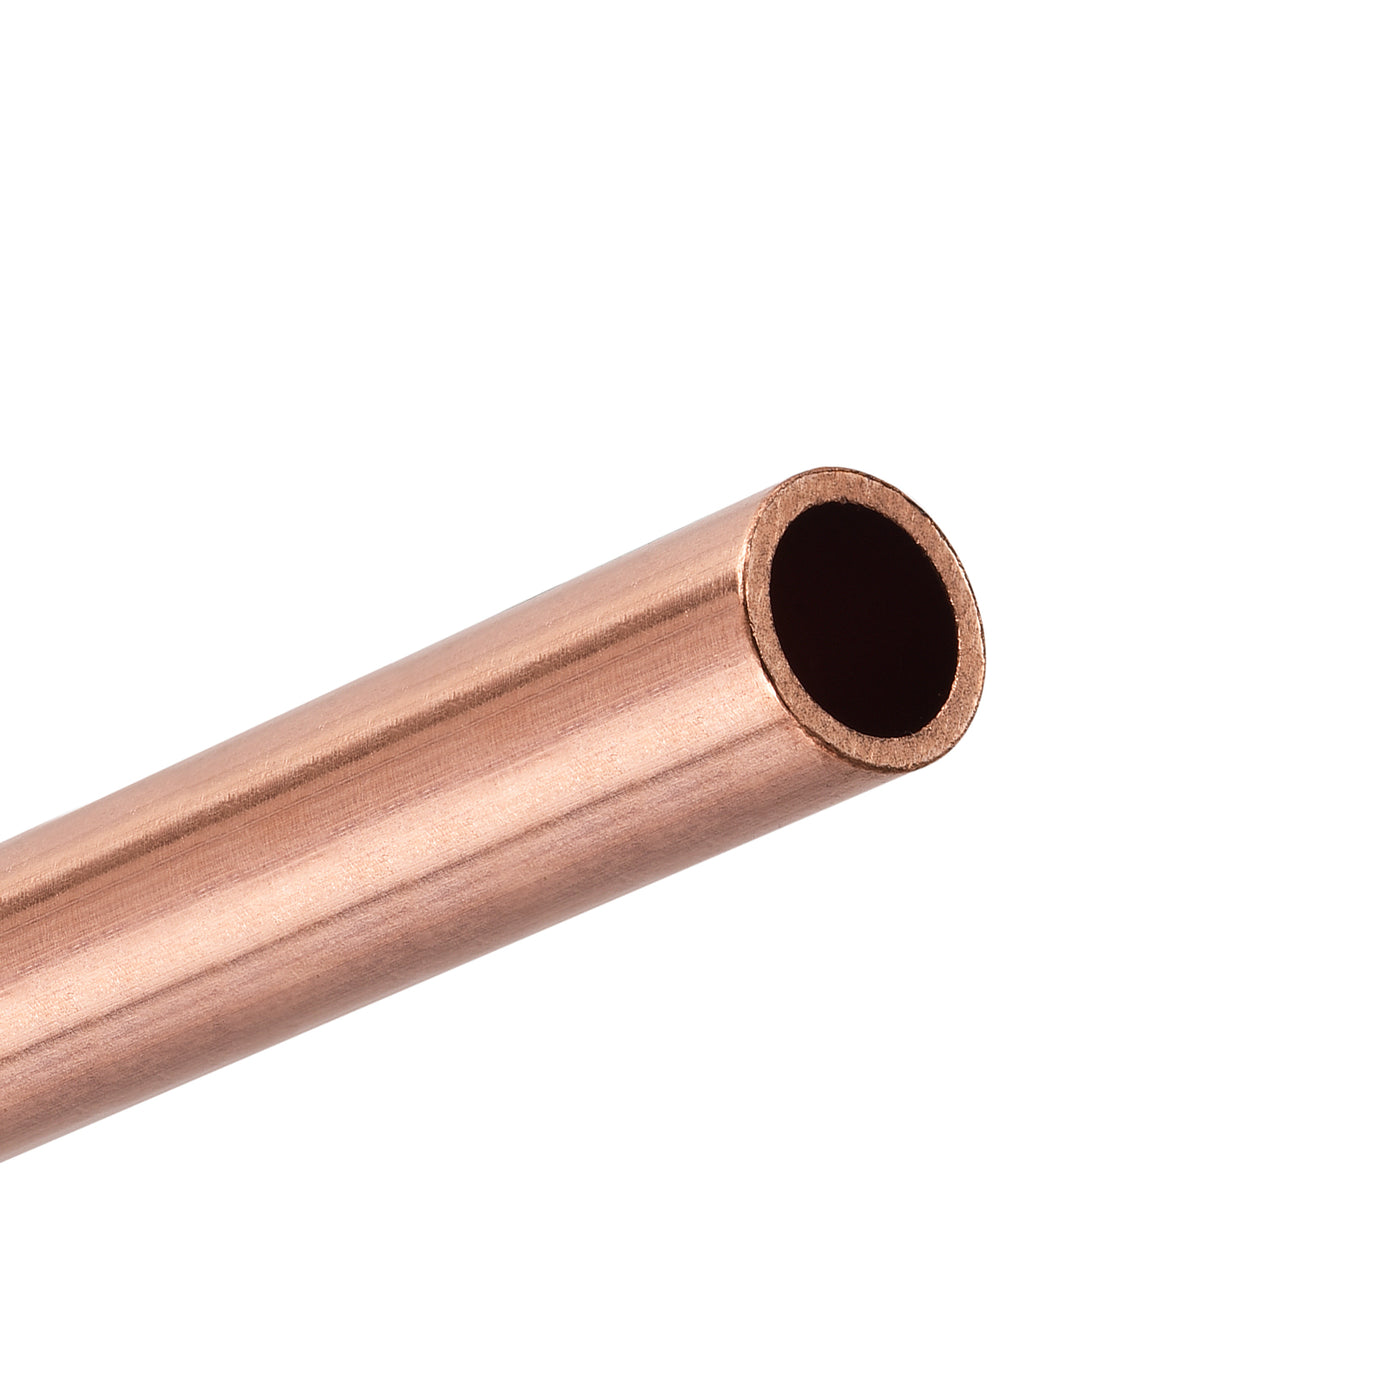 uxcell Uxcell Copper Round Tube 14mm OD 1.5mm Wall Thickness 100mm Length Pipe Tubing 2 Pcs